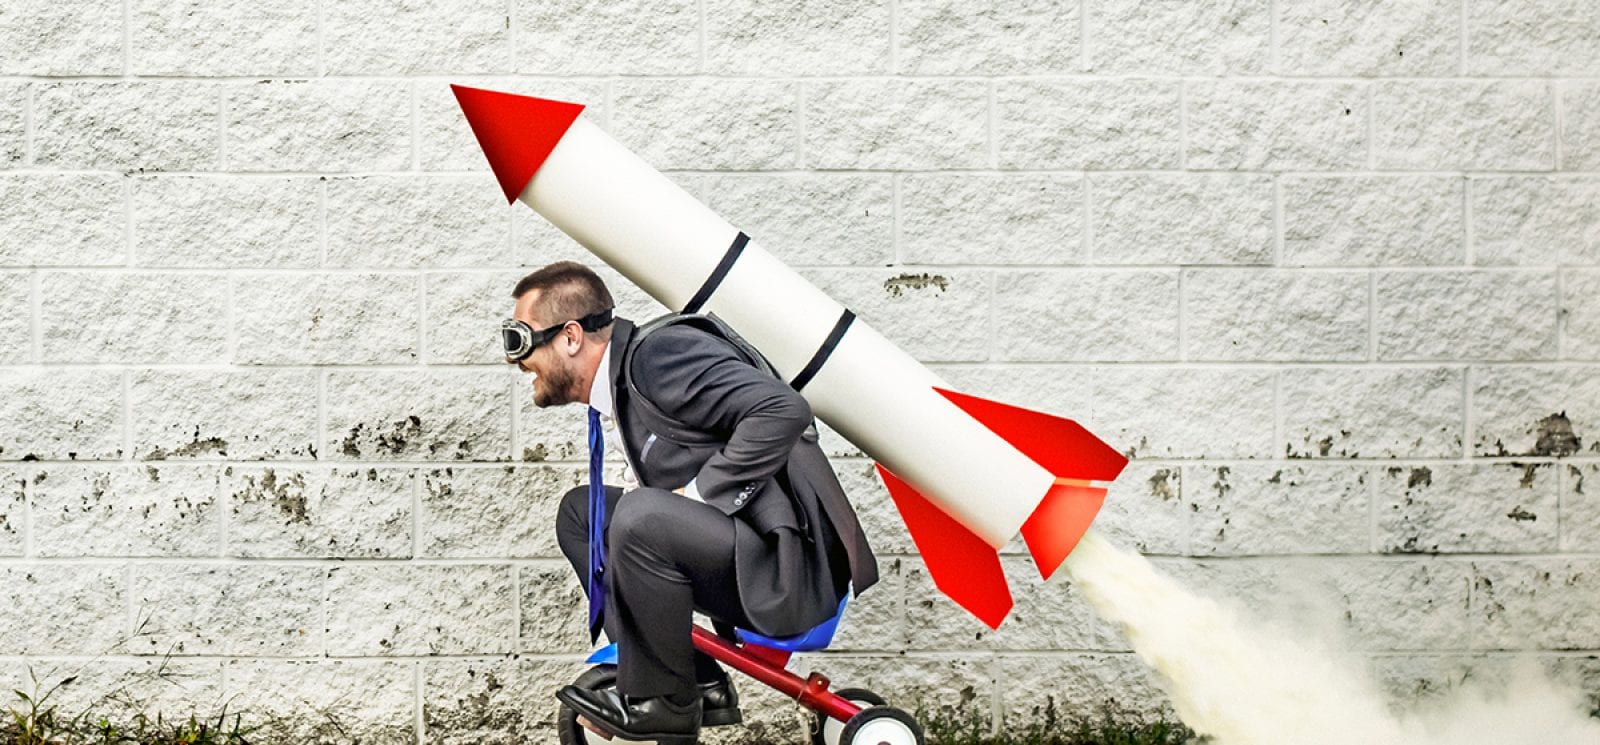 Man in kids tricycle with propelled by rocket